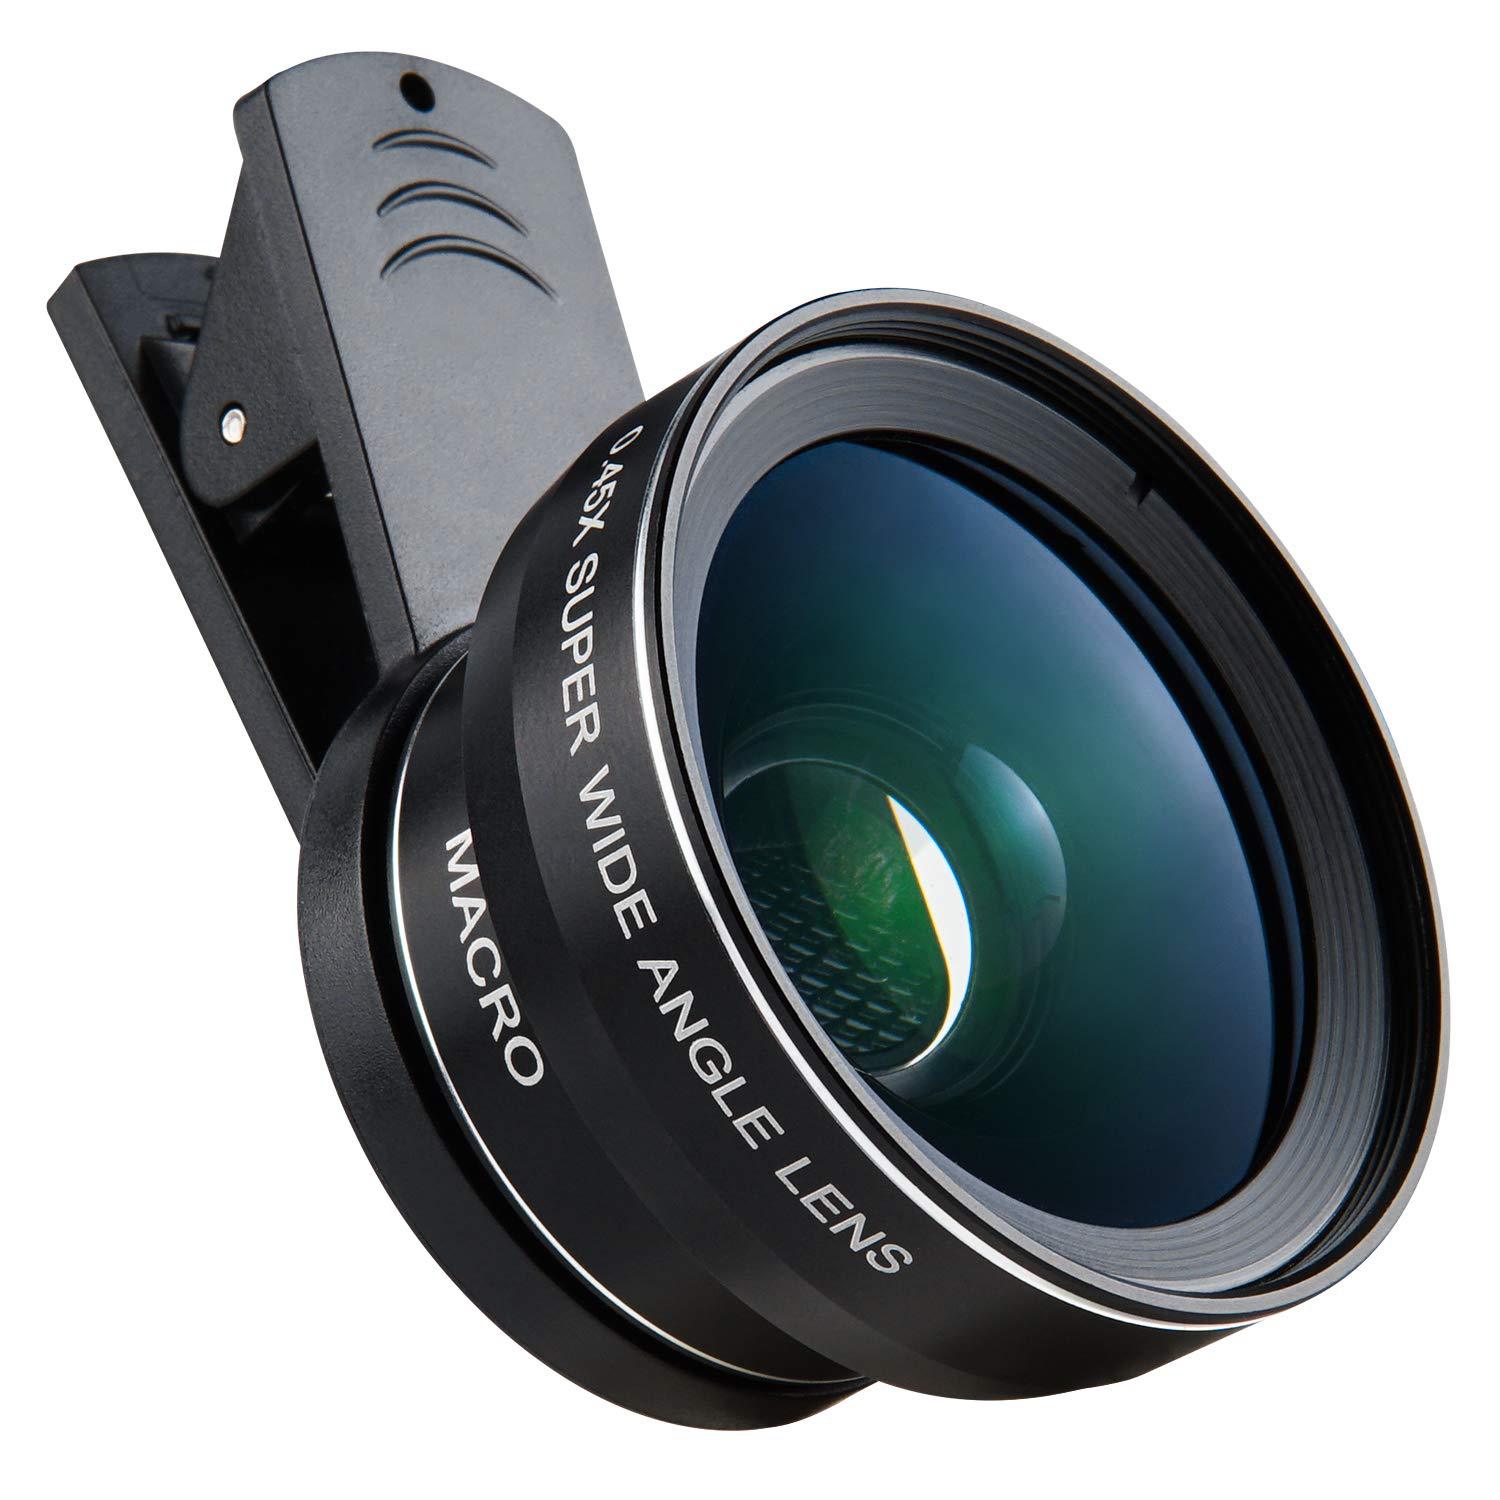 Mobile Phone Lens 0.45x High-definition Acrylic Distortion-free Wide-angle +12.5x Macro Two-in-one External Lens